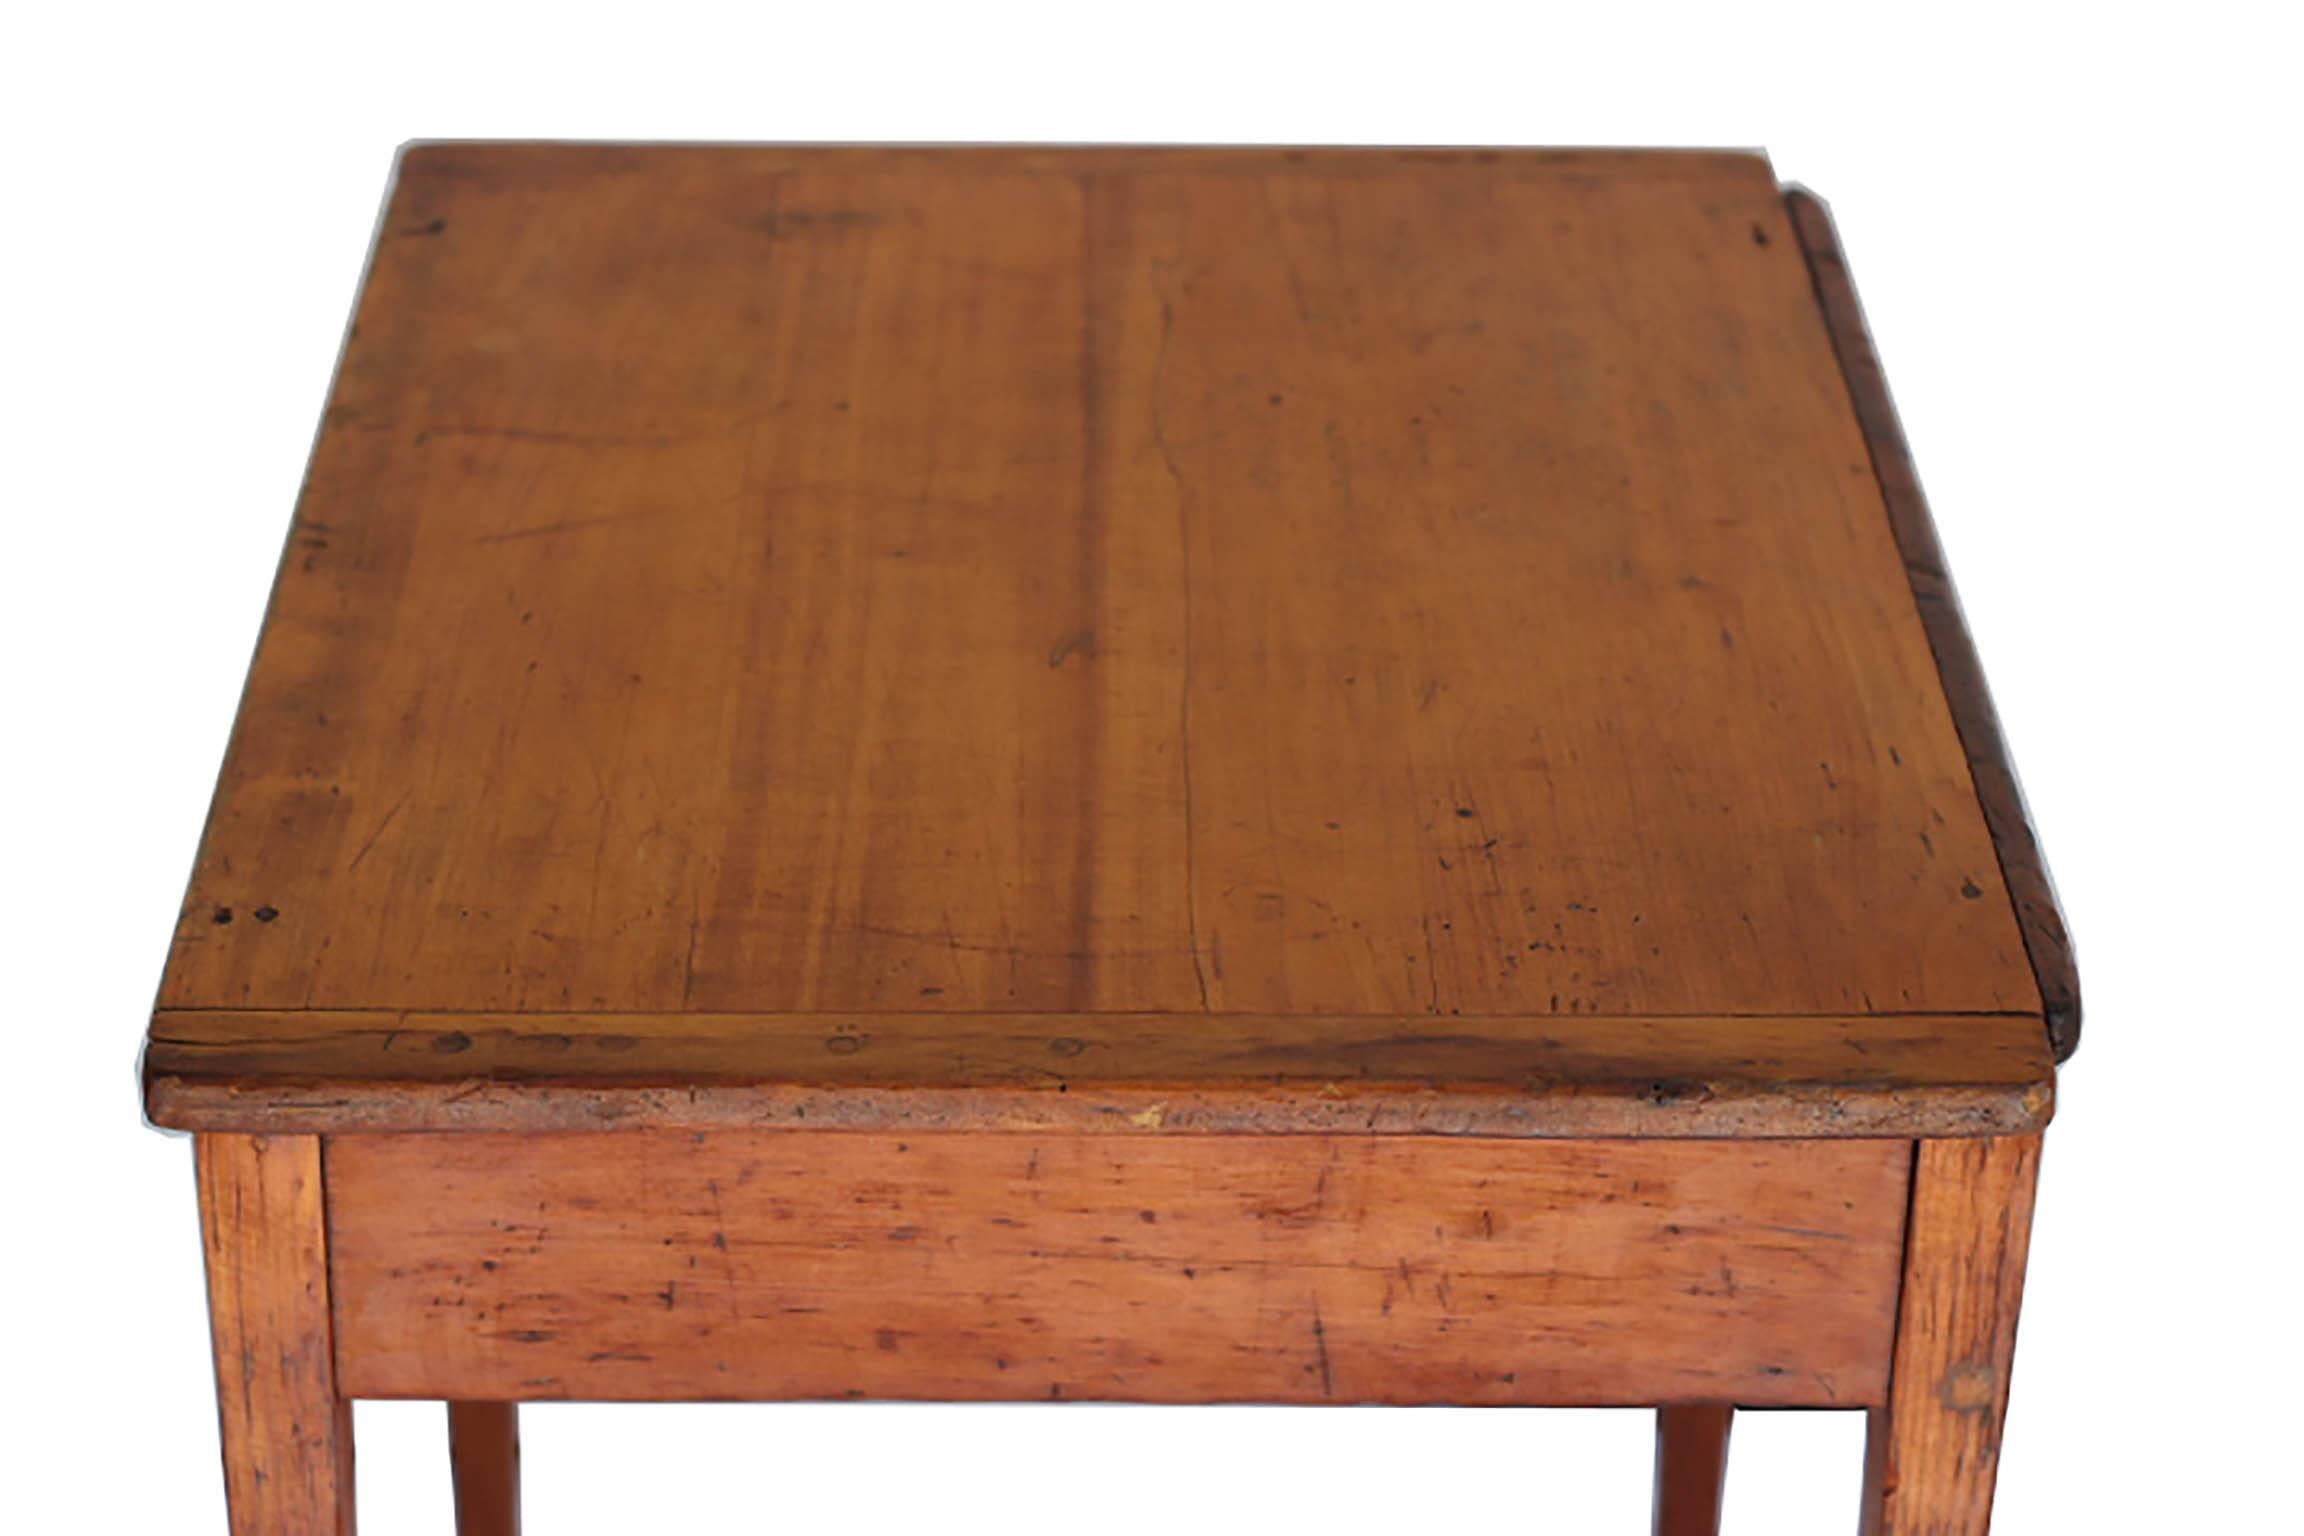 18th c. Rare Cherry and Southern Yellow Pine Side Table c. 1770-1790 1